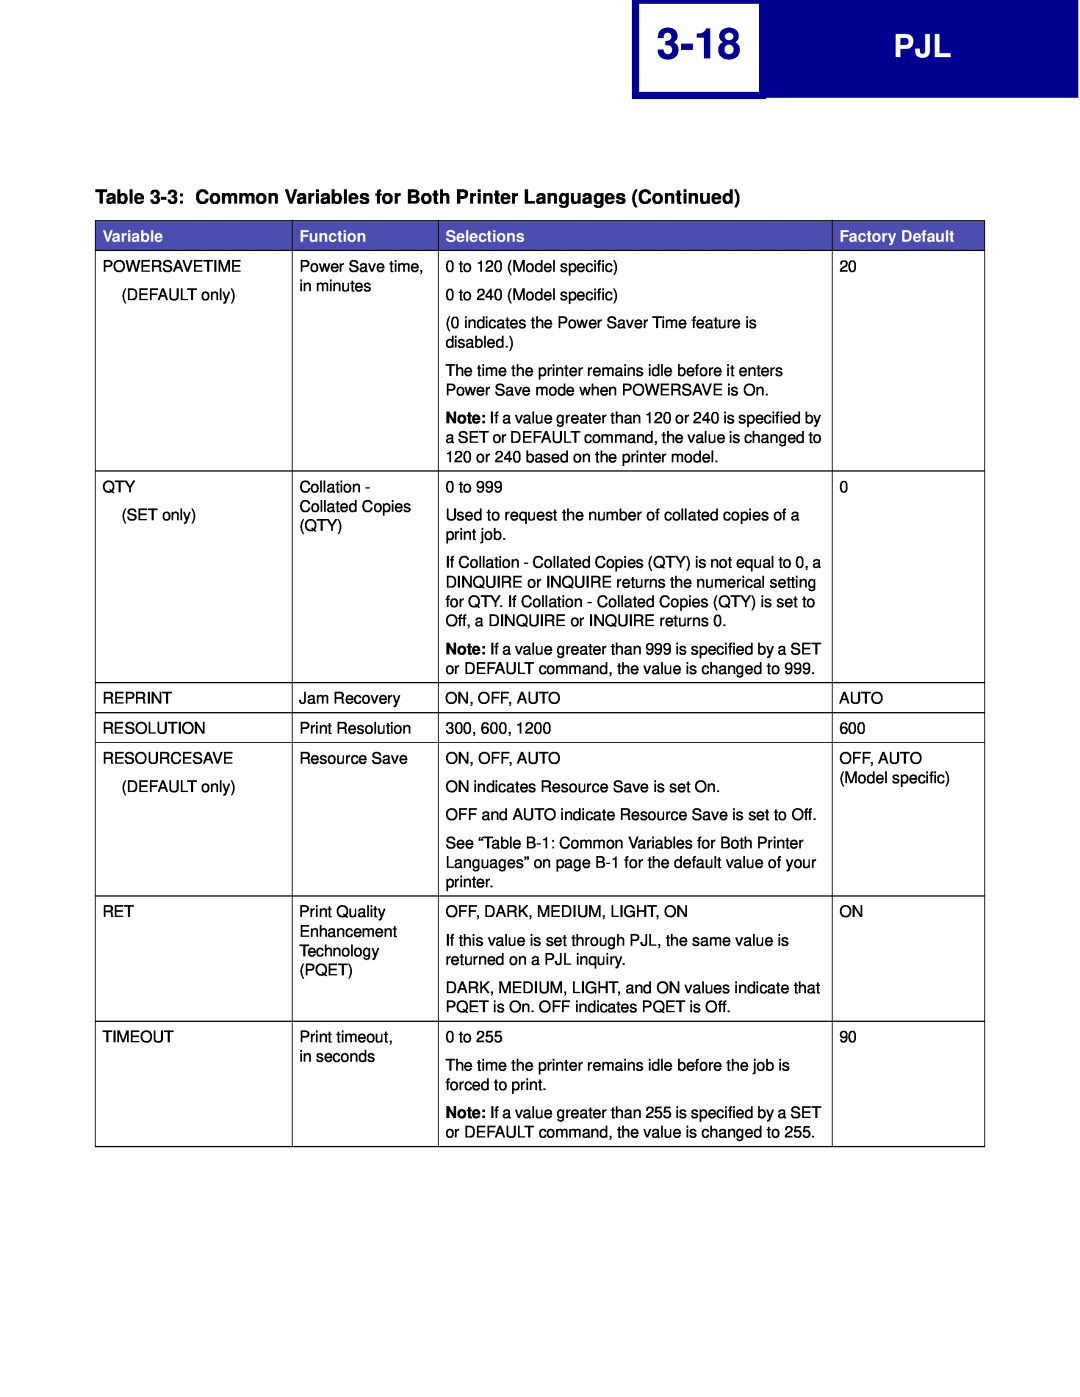 Lexmark C762, C760 manual 3-18, 3 Common Variables for Both Printer Languages Continued 